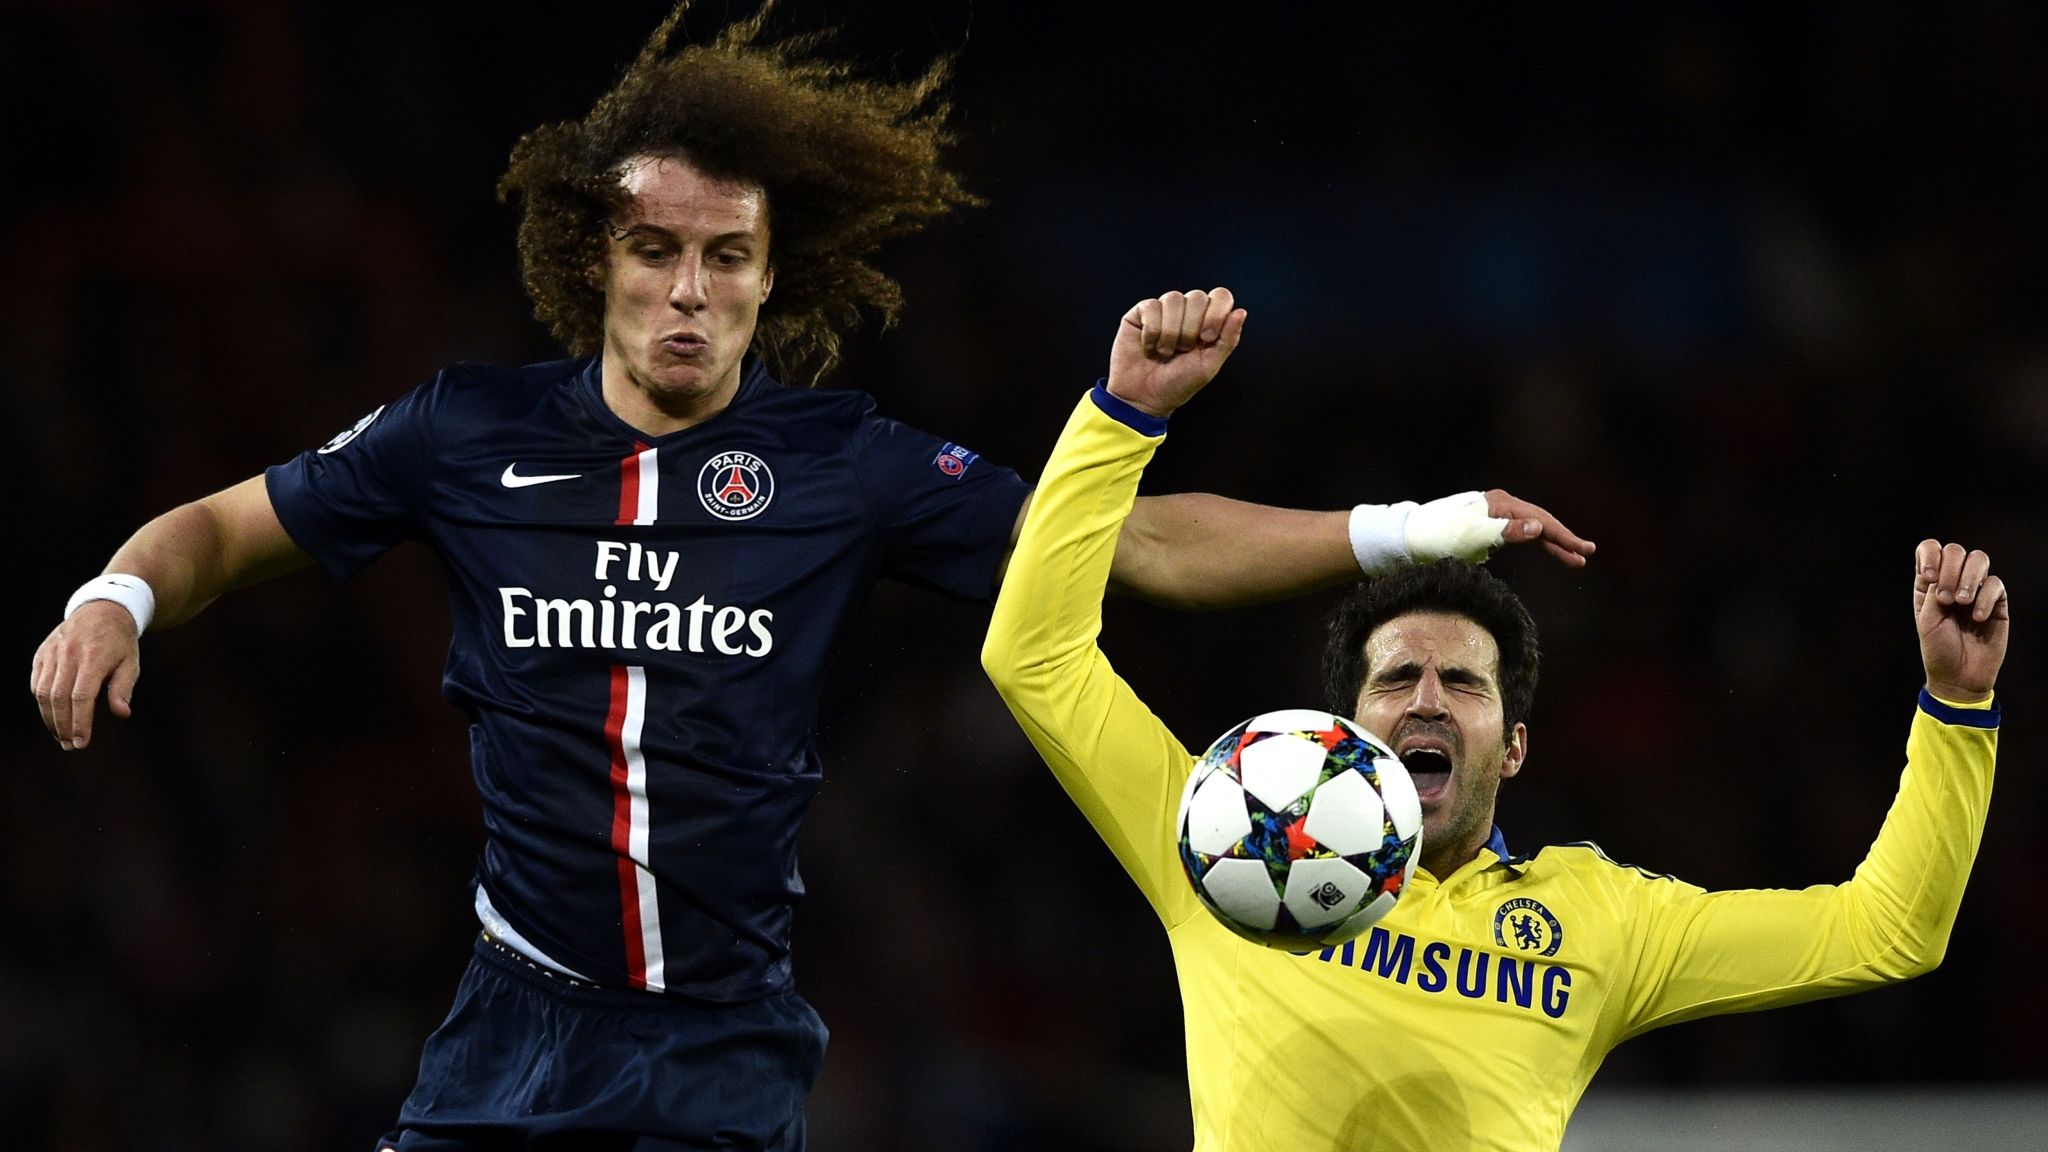 David Luiz can trouble Chelsea in Champions League return with PSG